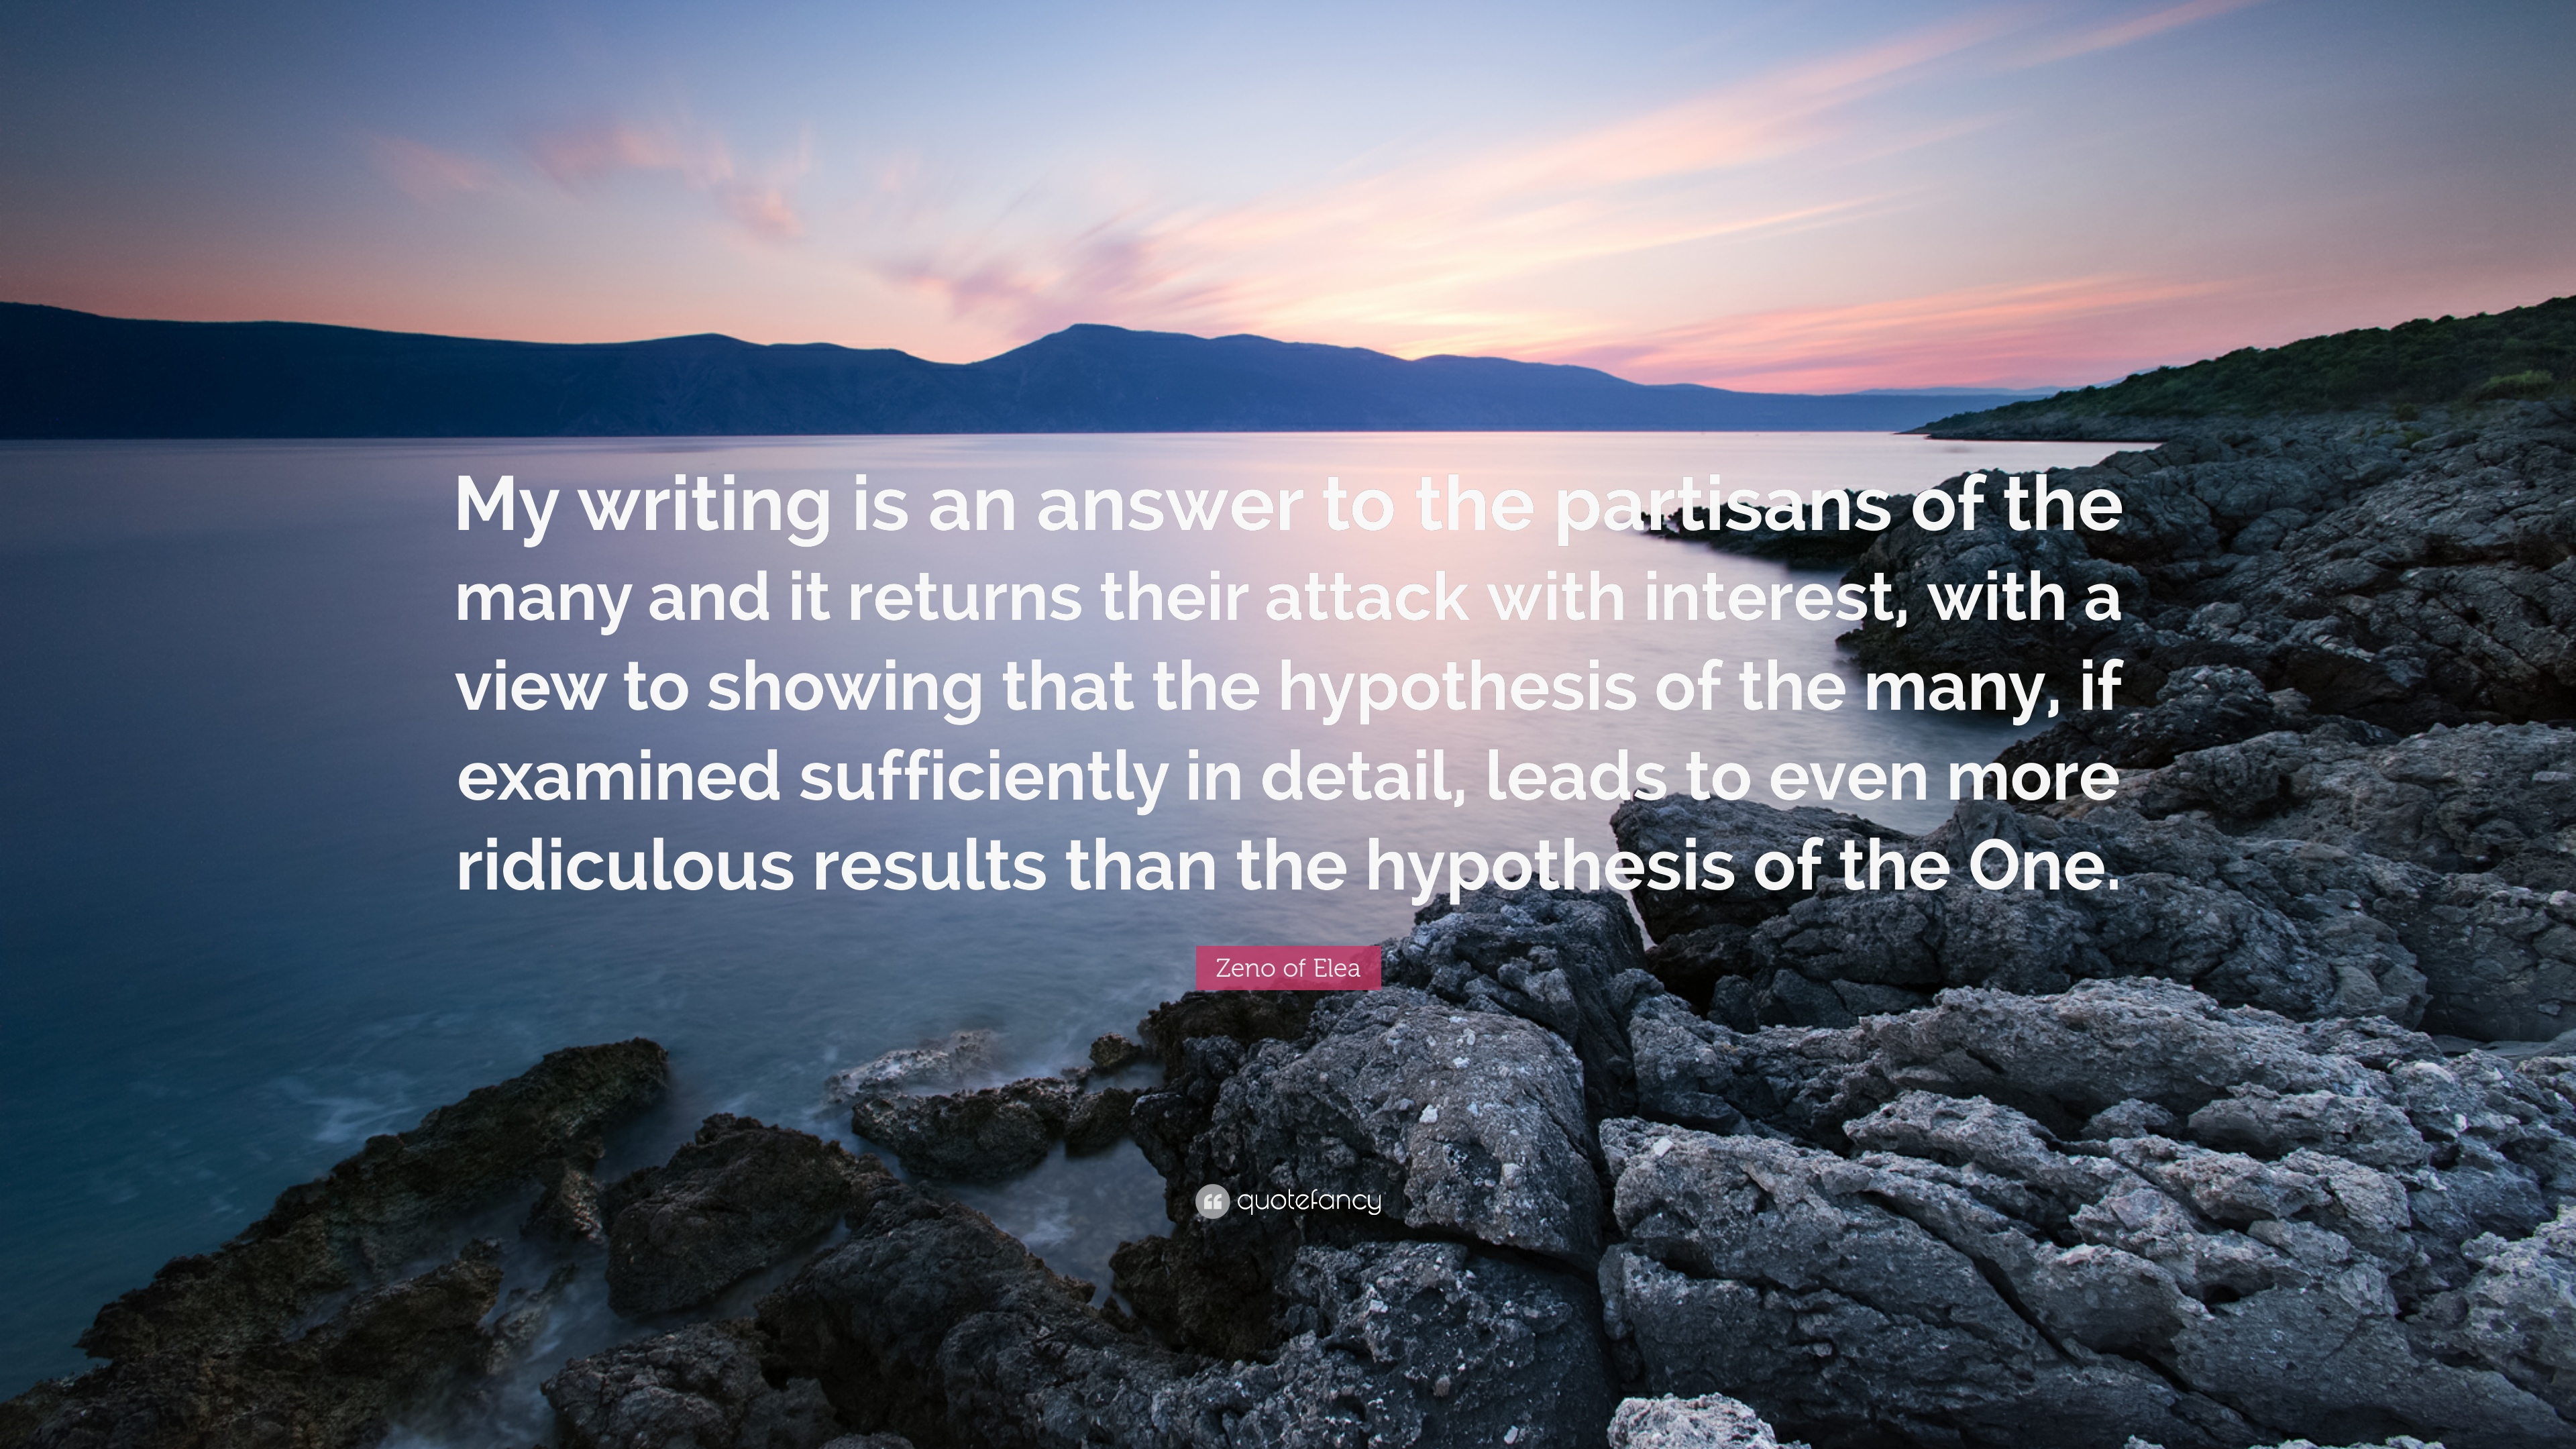 Zeno of Elea Quote: “My writing is an answer to the partisans